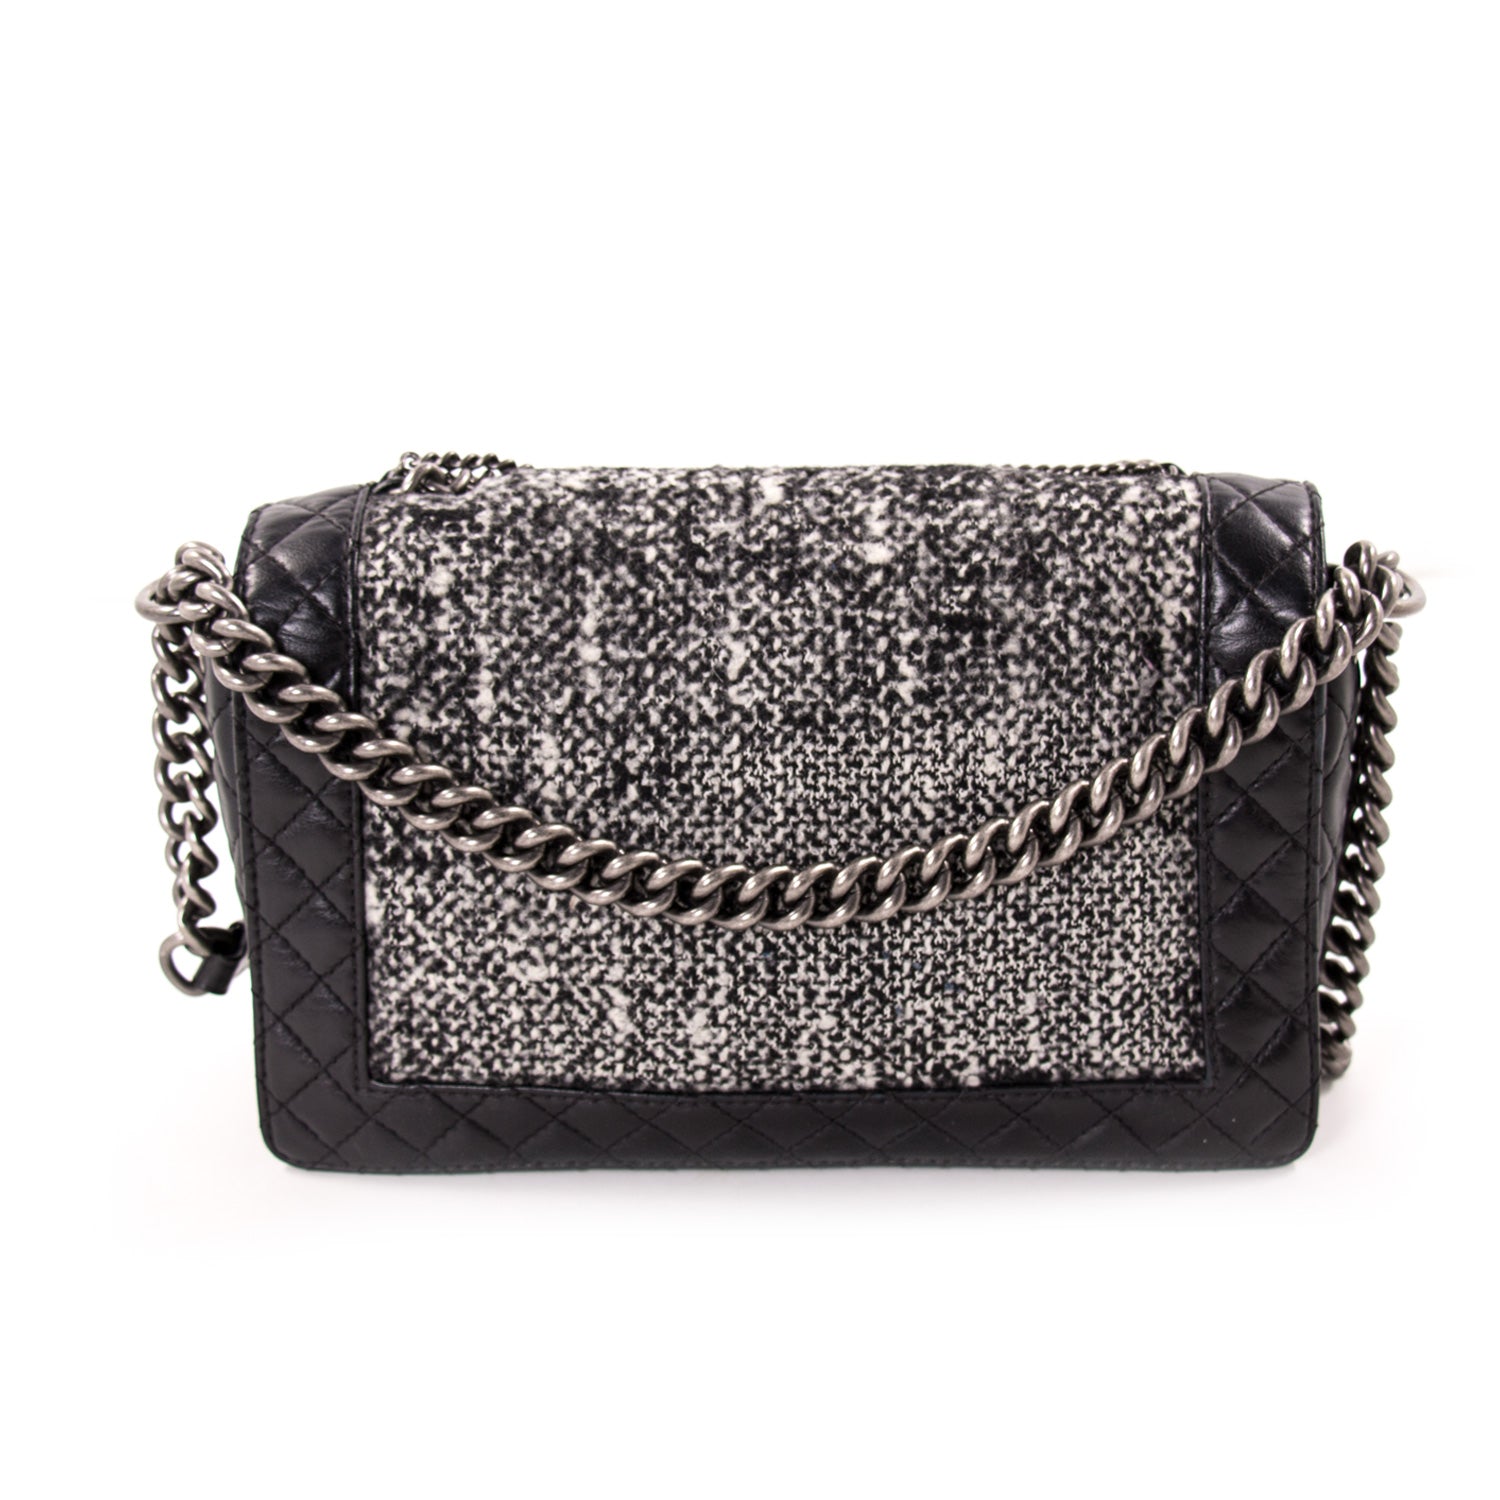 Shop authentic Chanel New Medium Enchained Boy Flap Bag at revogue for ...